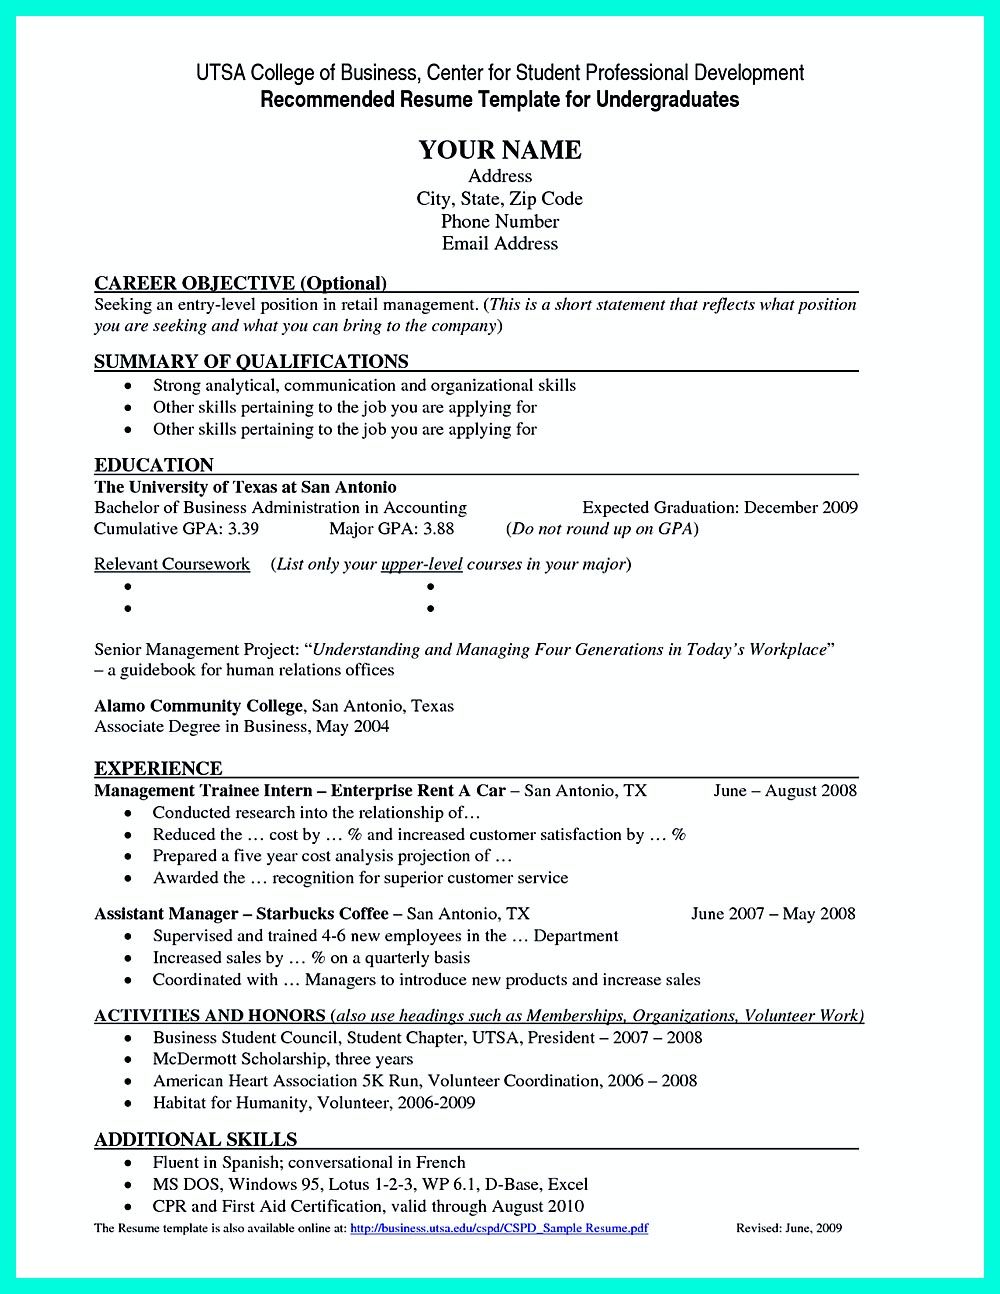 Best Current College Student Resume with No Experience Job resume